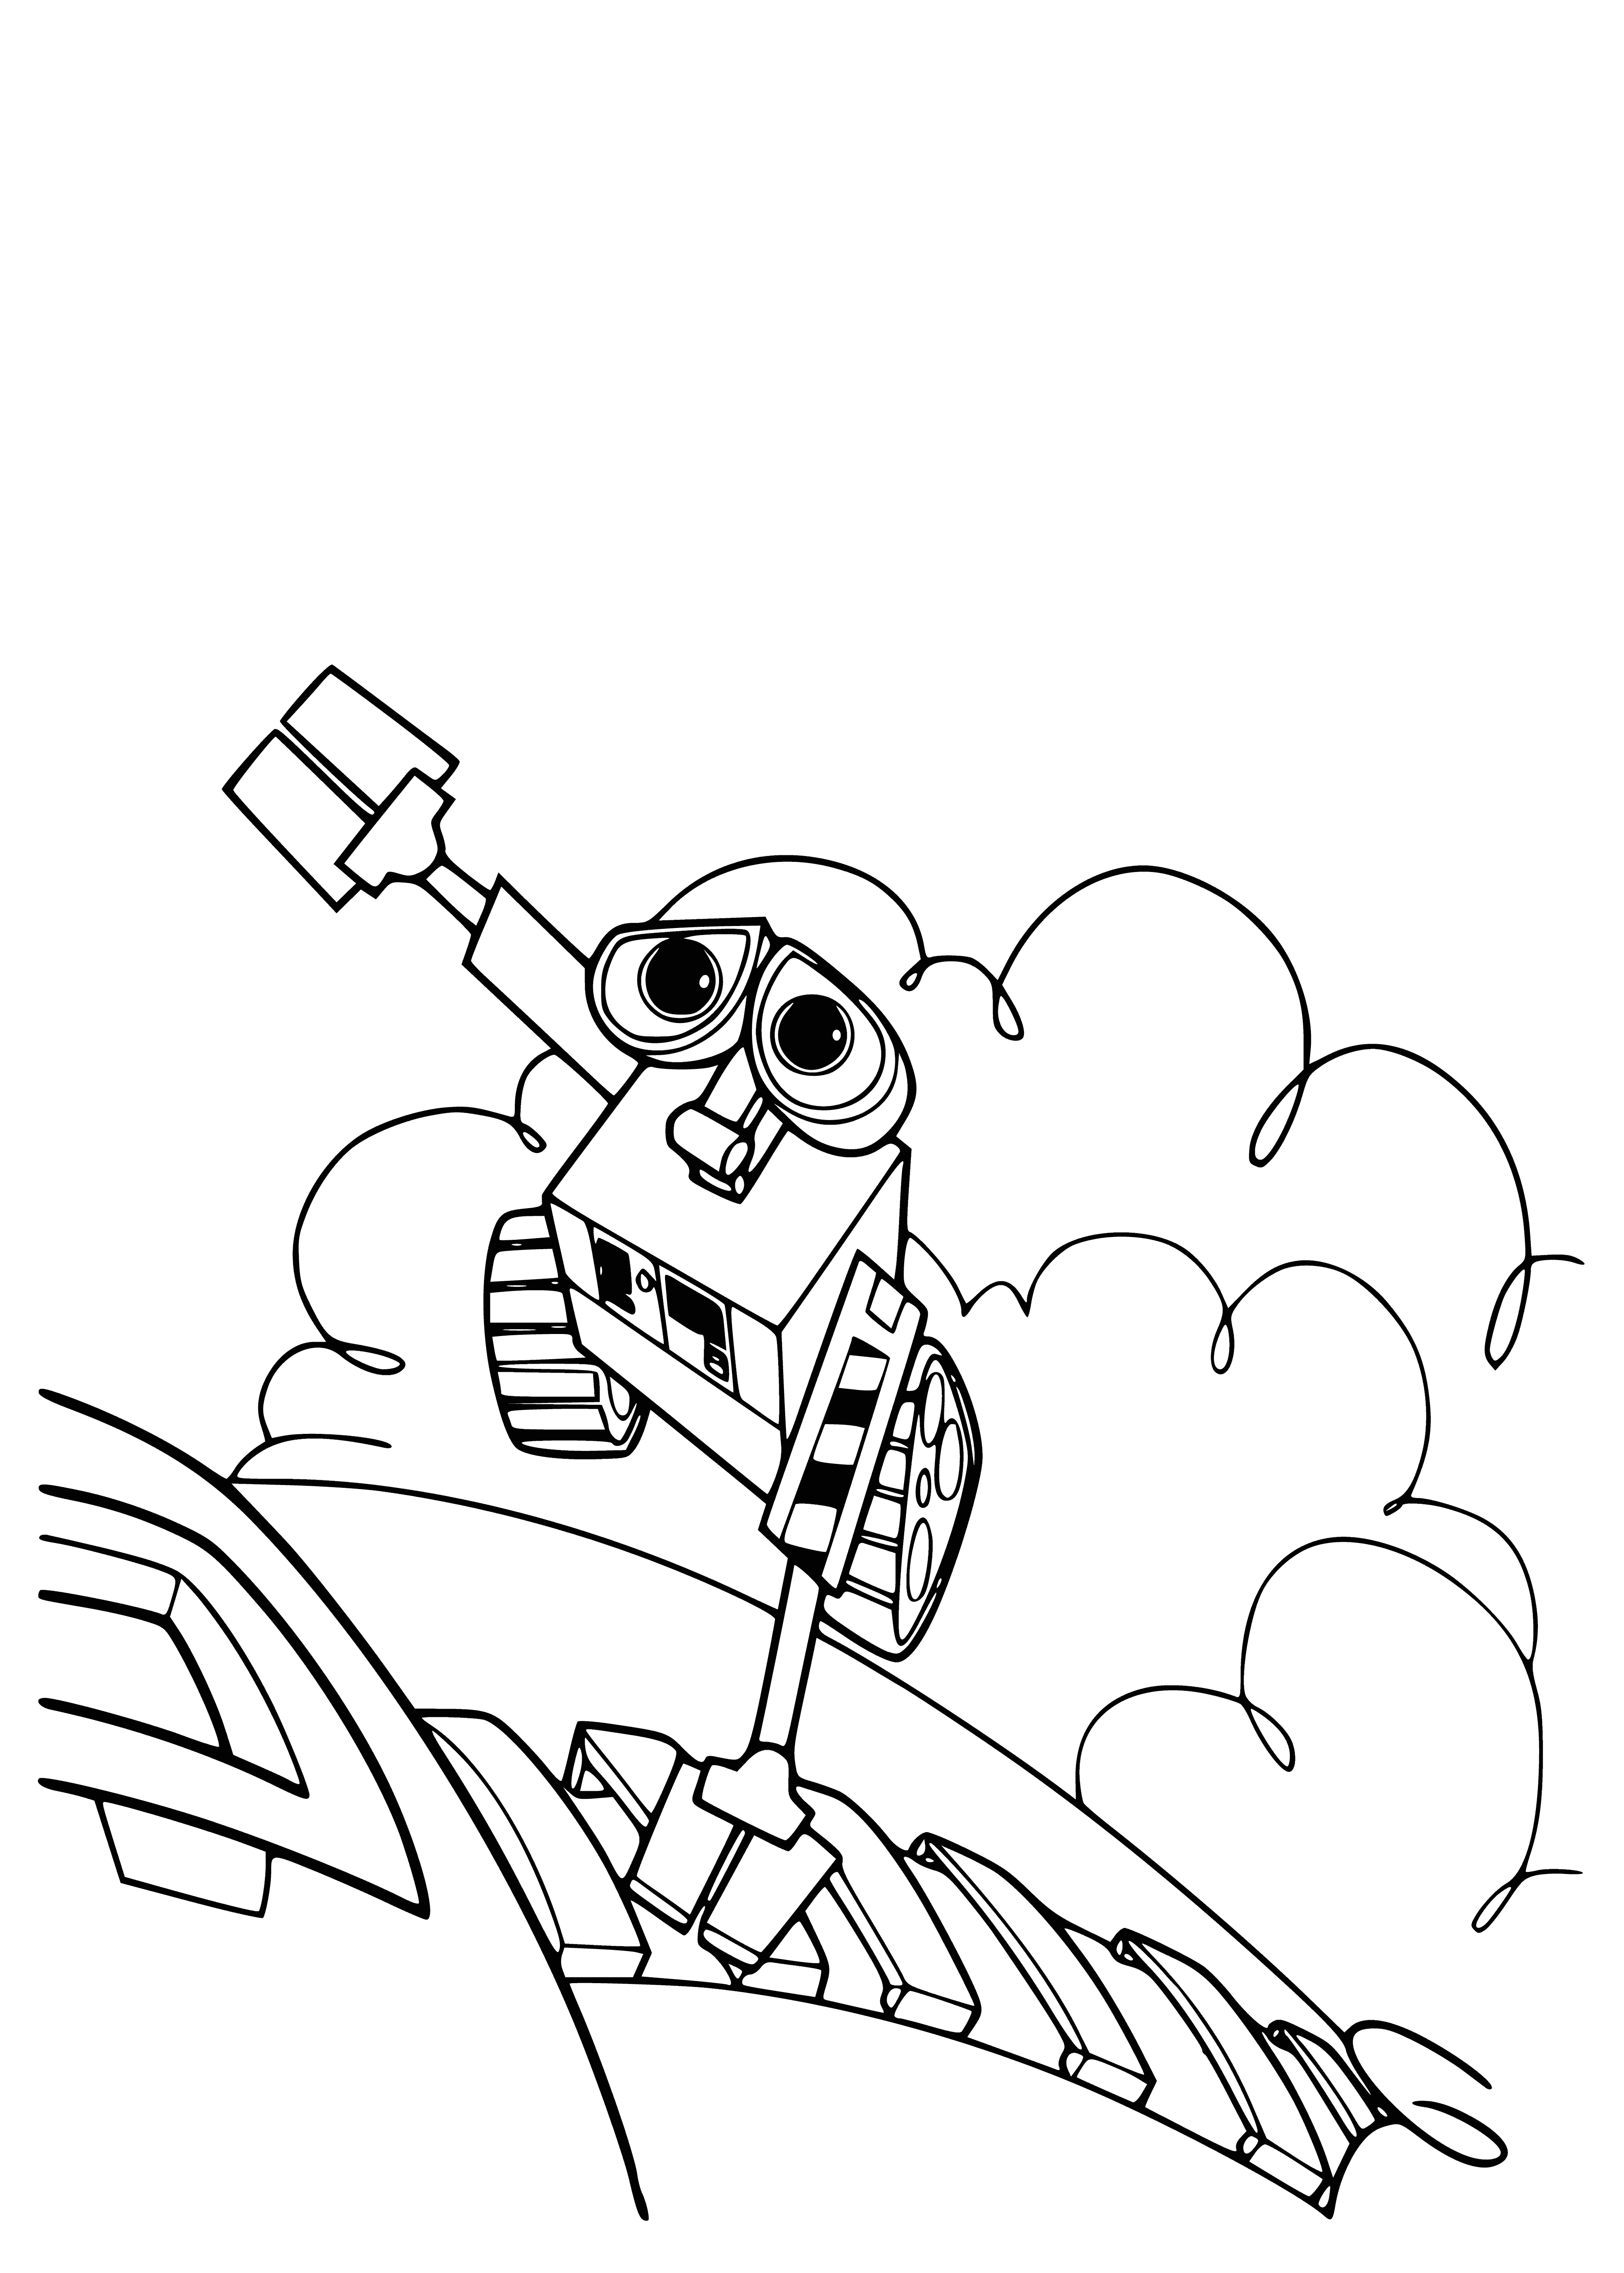 coloring page: Wall-e is a huge creature with a long neck, small body, thin legs, long arms and sharp teeth. Its gaze intense, it holds on. #wall-e